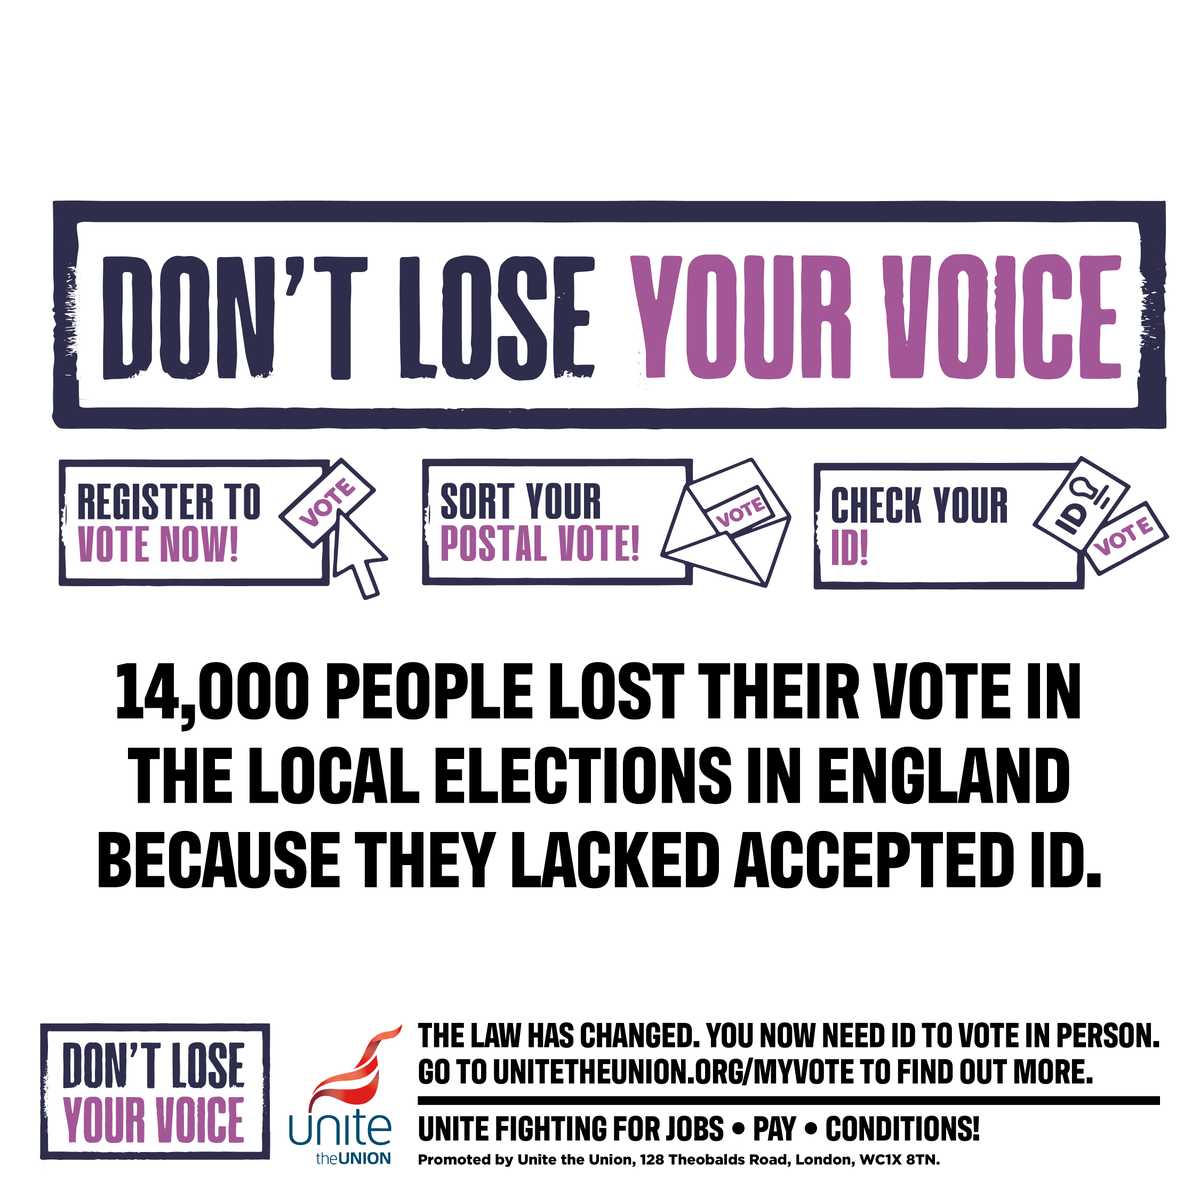 🗳️Elections are taking place across Wales and England on 2 May. Are you ready? ❗You now need ID to vote at a polling station. 📲Remember to register to vote first! #DontLoseYourVoice 👉Find everything you need to get vote ready at unitetheunion.org/myvote